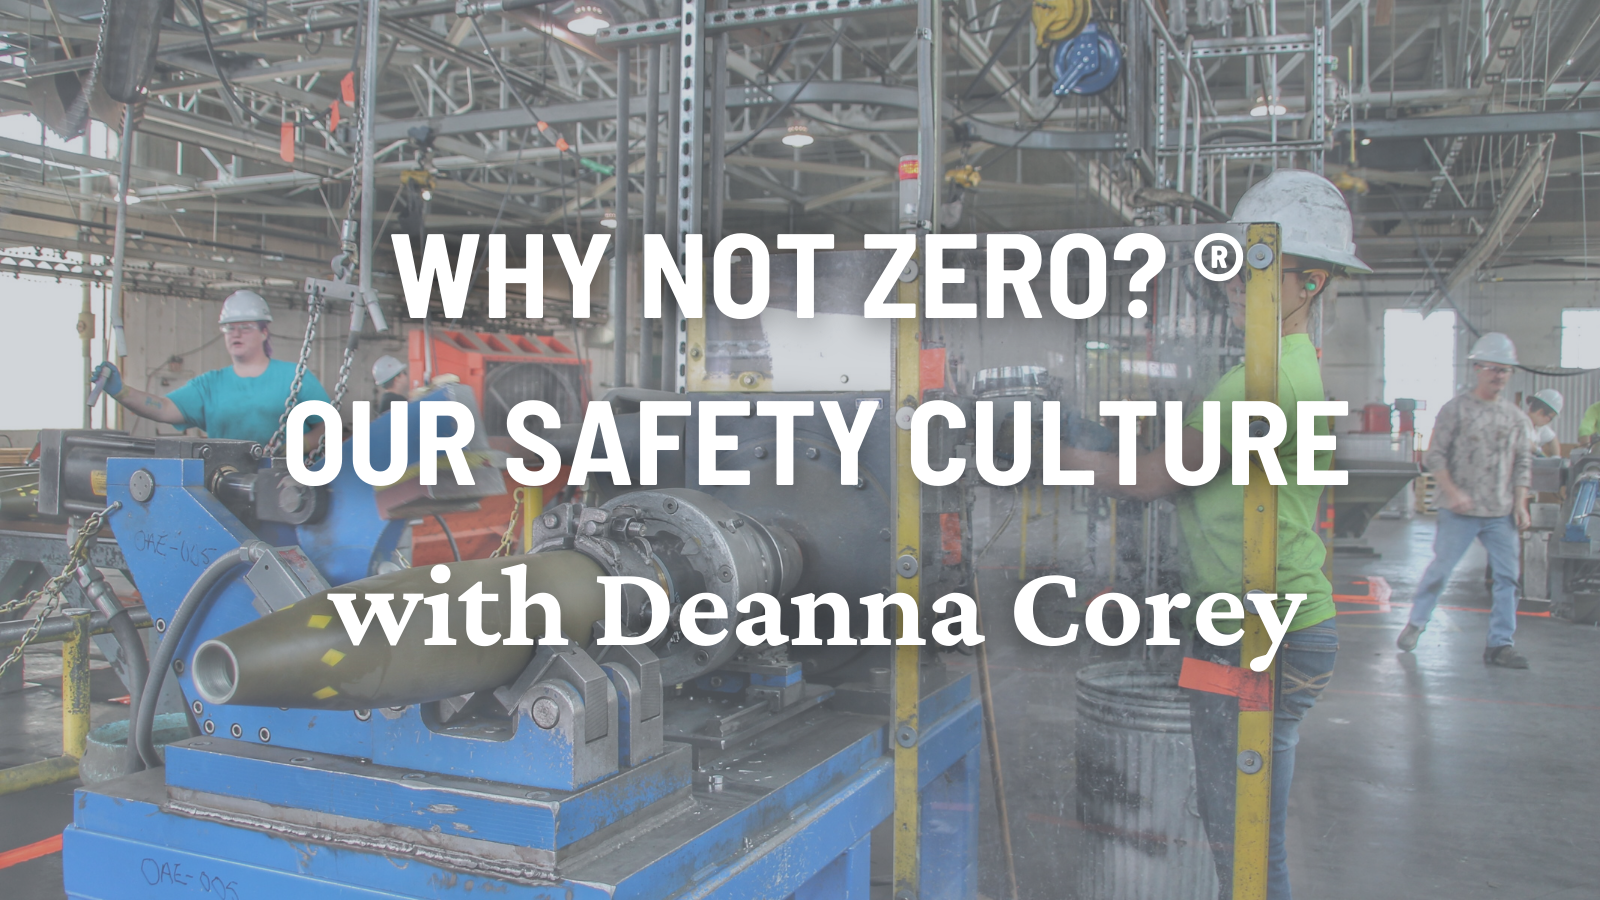 Why Not Zero? ® Our Safety Culture